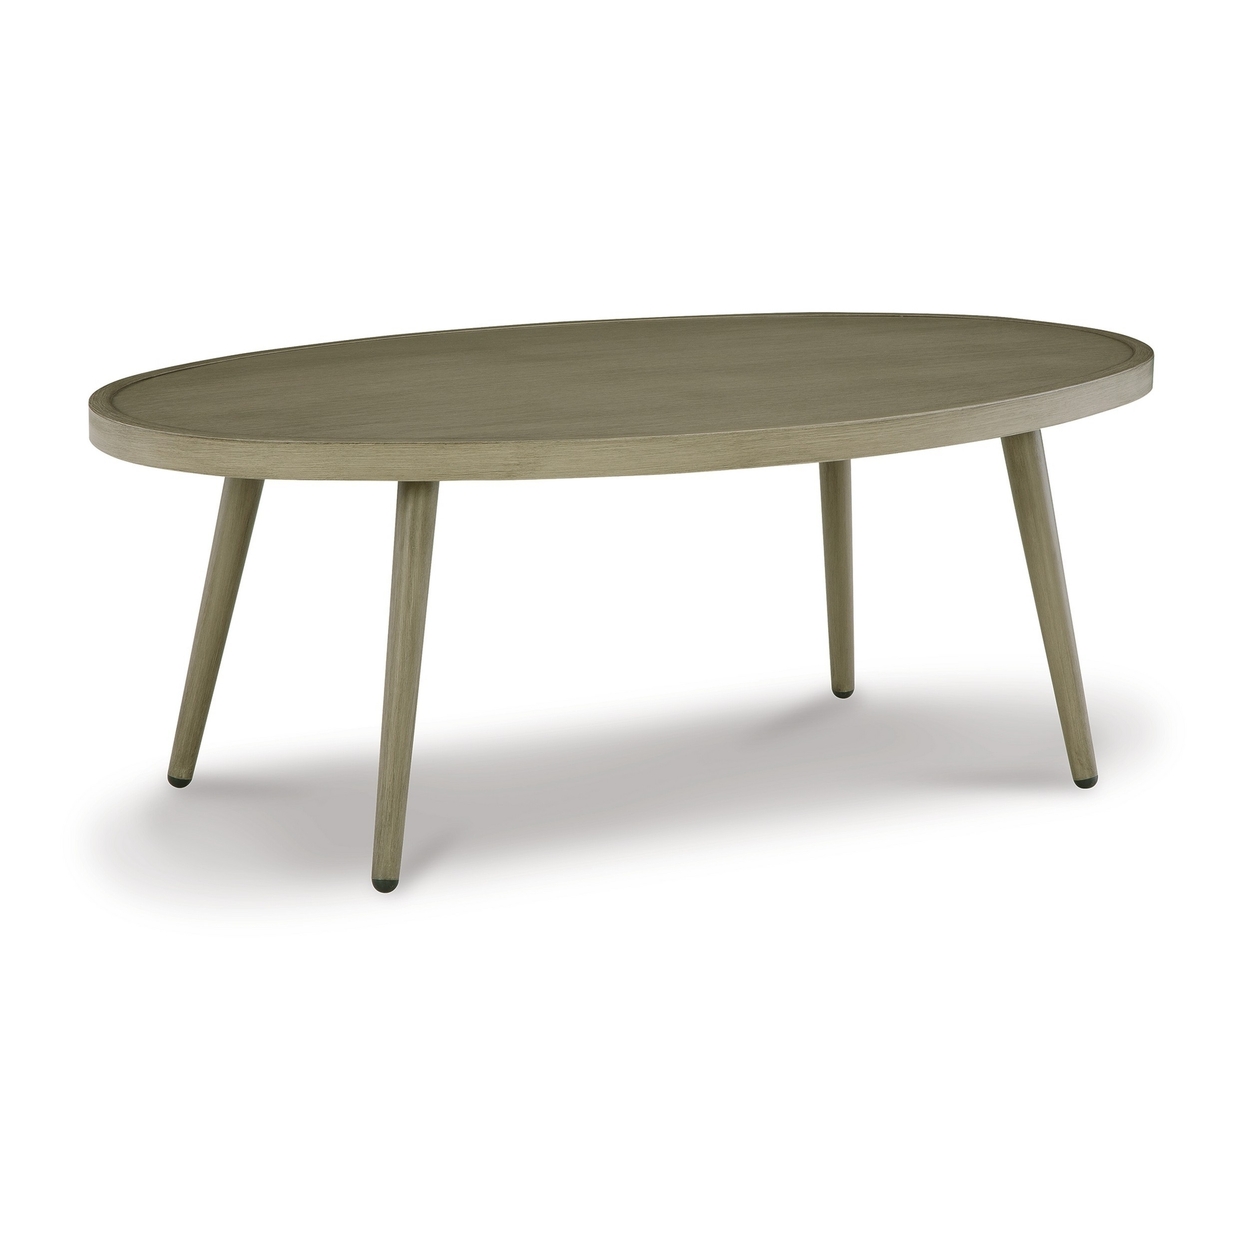 Sven 48 Inch Outdoor Coffee Table, Oval Top And Aluminum Frame, Brown - Saltoro Sherpi